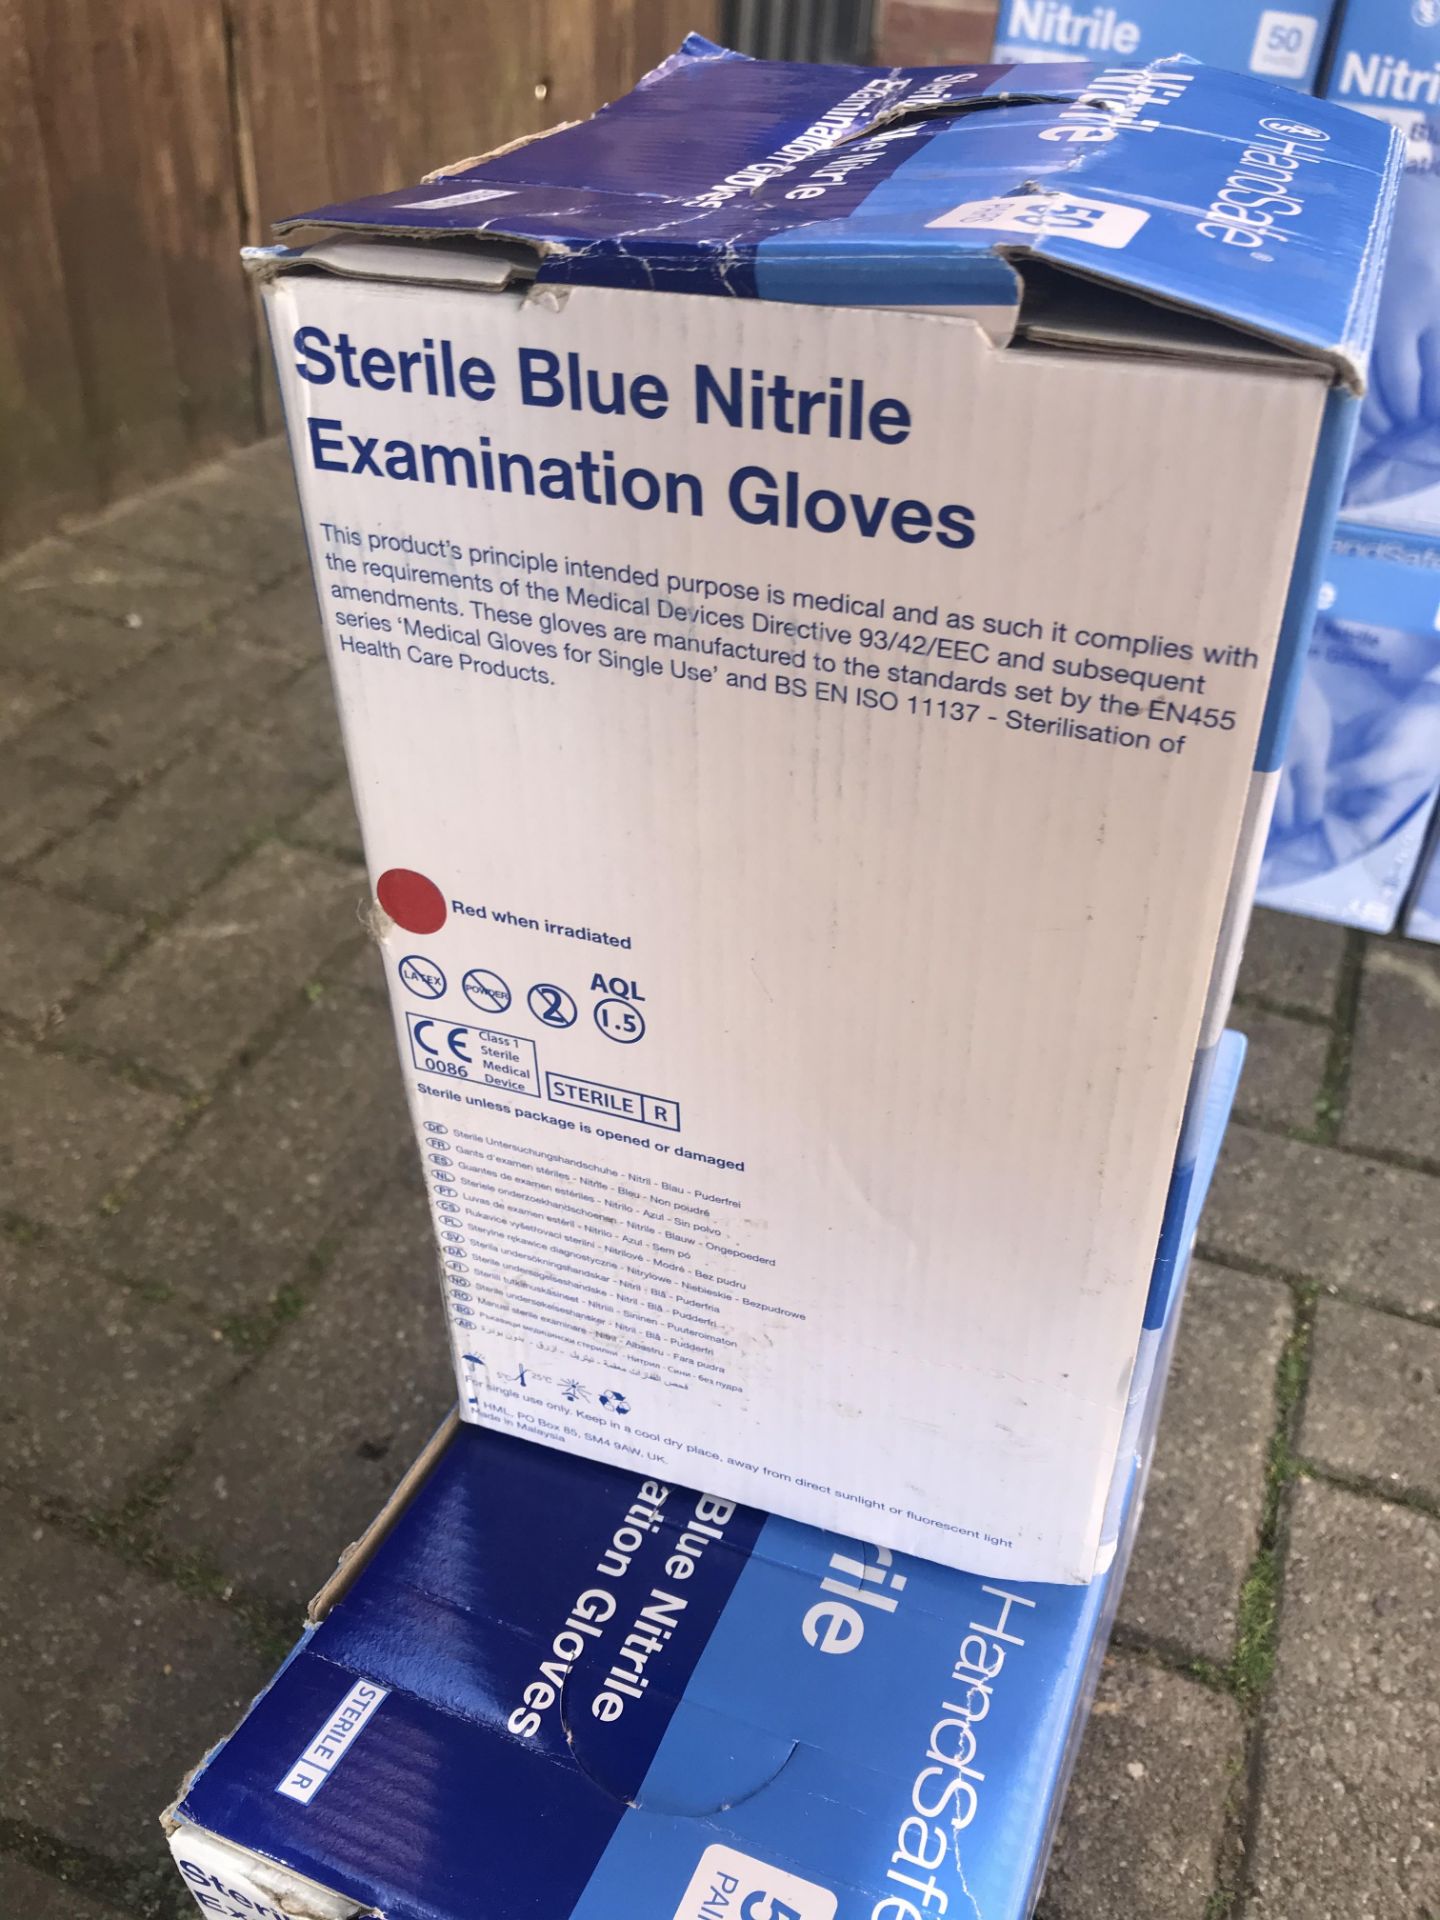 300 HANDSAFE NITRILE STERILE BLUE EXAMINATION GLOVES QTY: 3 CASES EACH CASE HAS 100 GLOVES PER BOX - Image 4 of 4